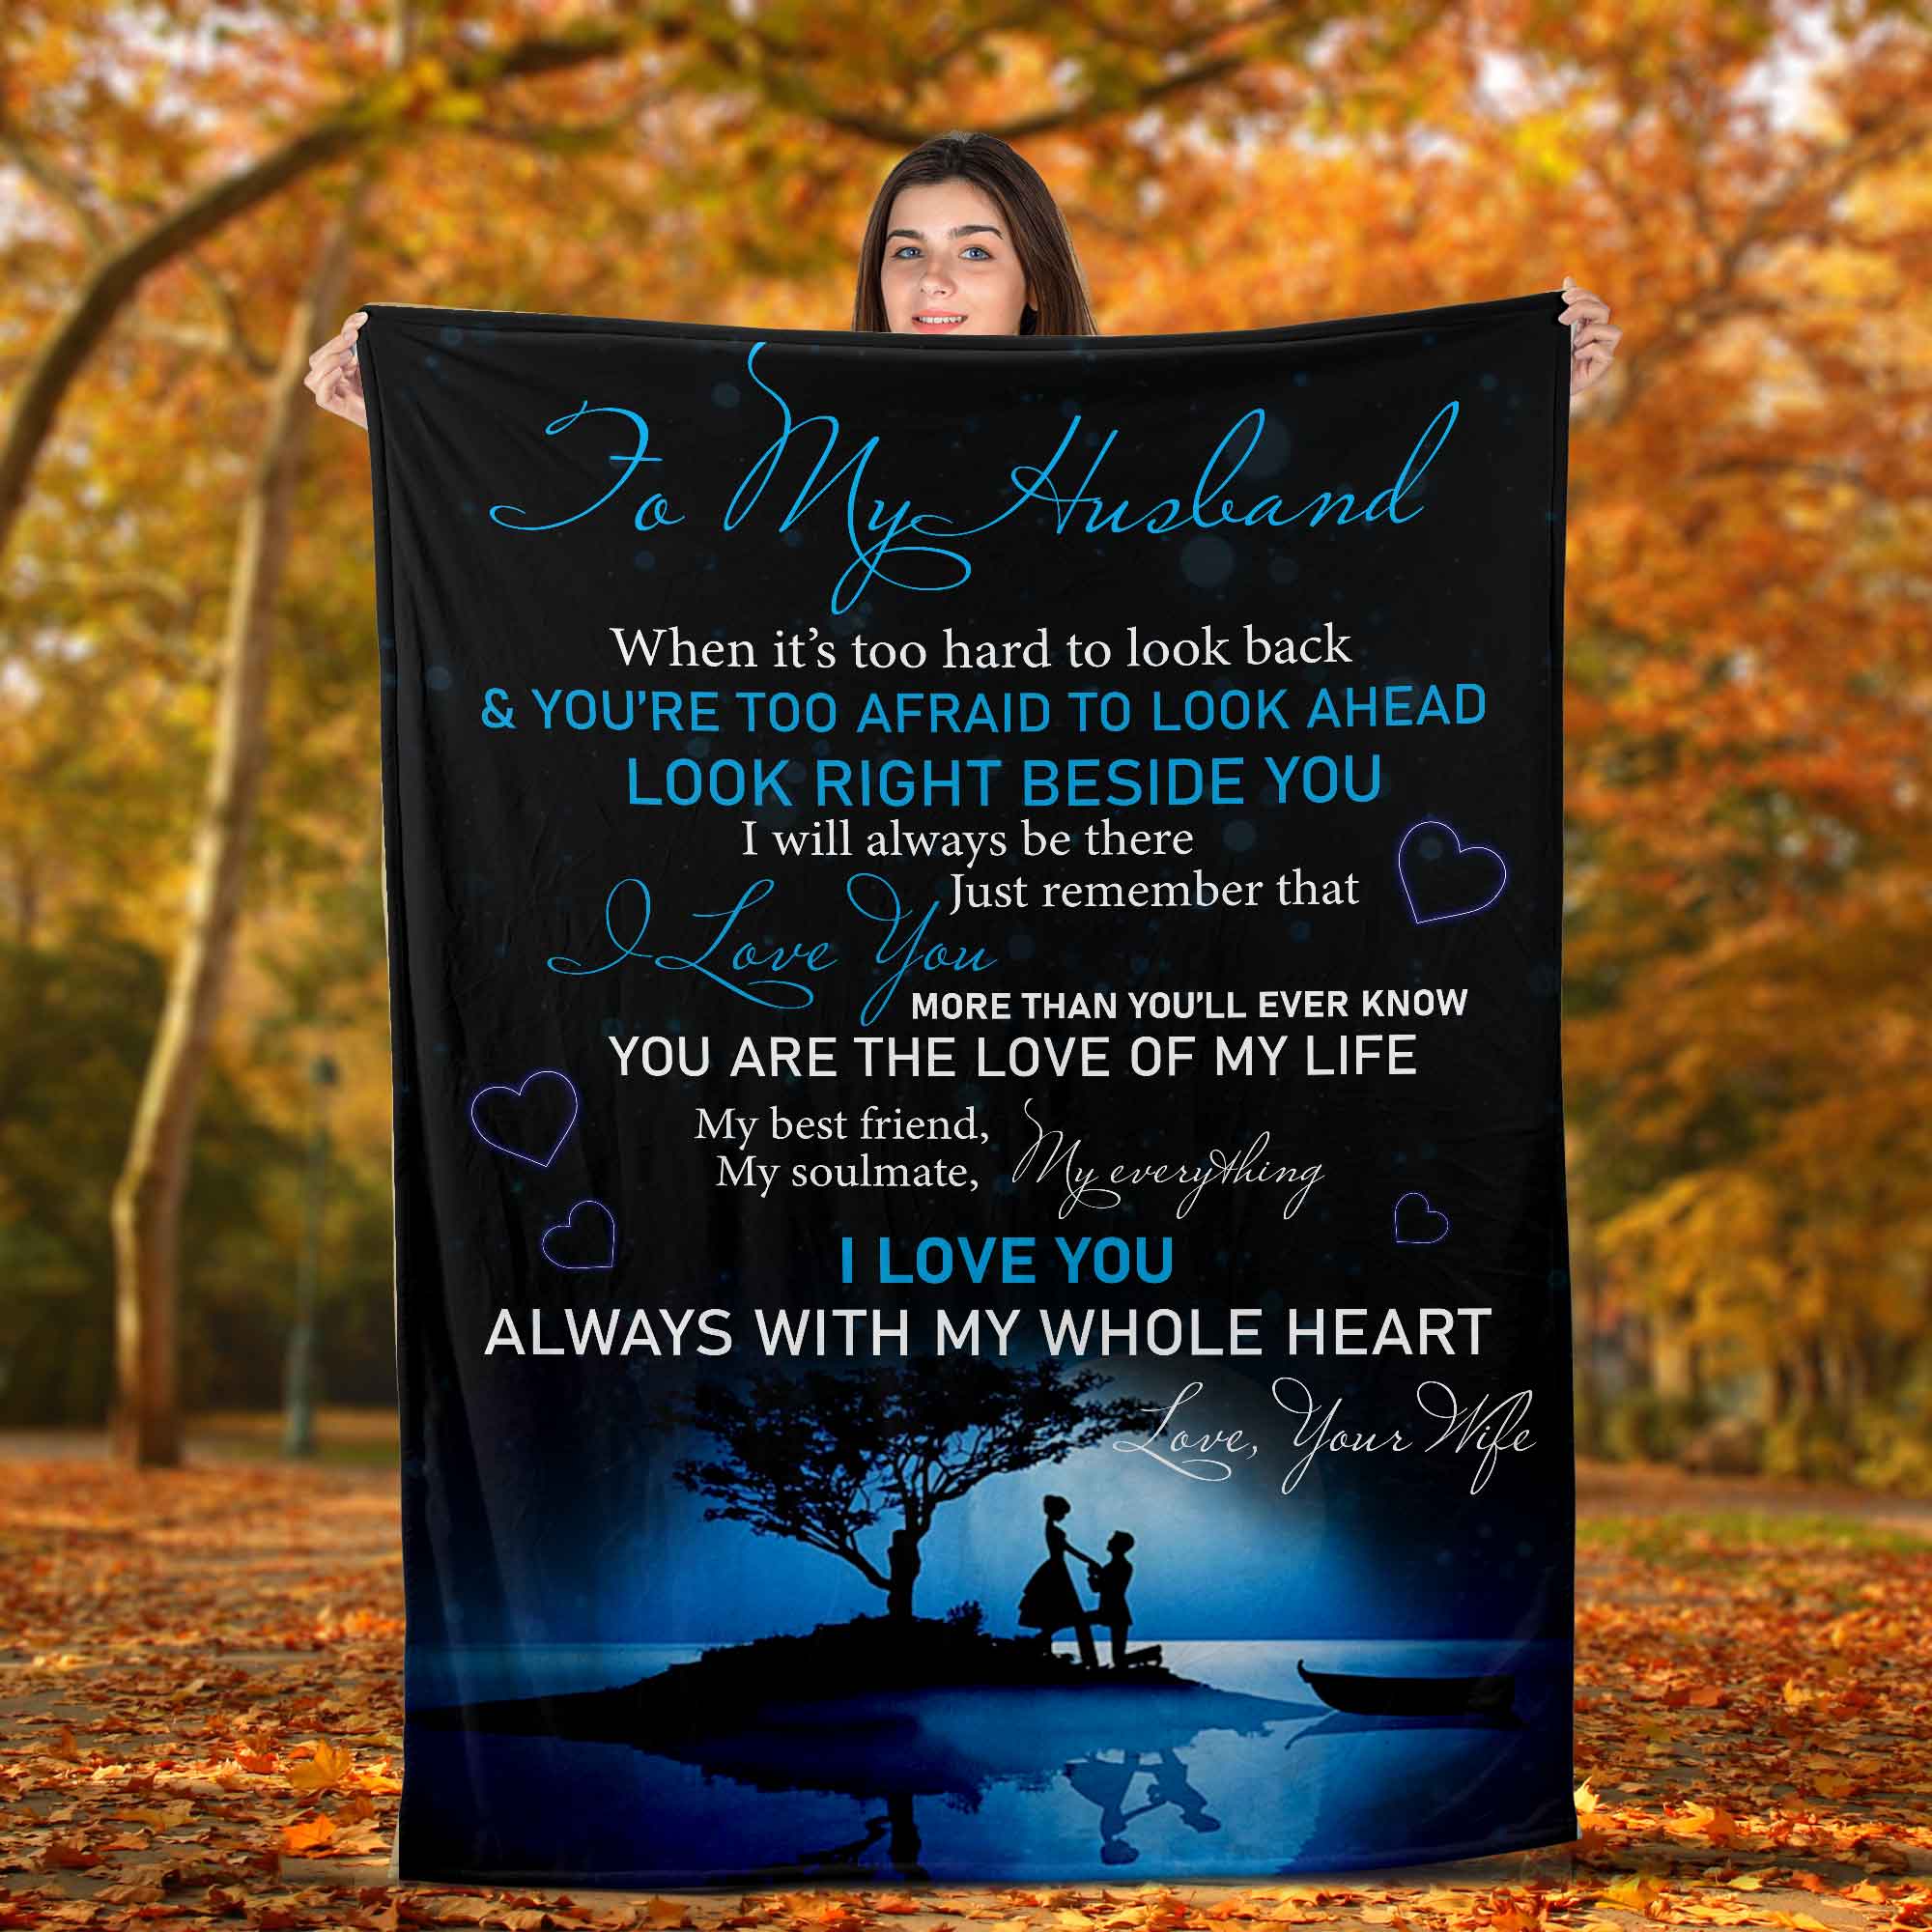 Skitongifts Blanket For Sofa Throws, Bed Throws Blanket - To Husband I'll Always Be There Remember That I Love You Always With My Whole Heart-TT1501